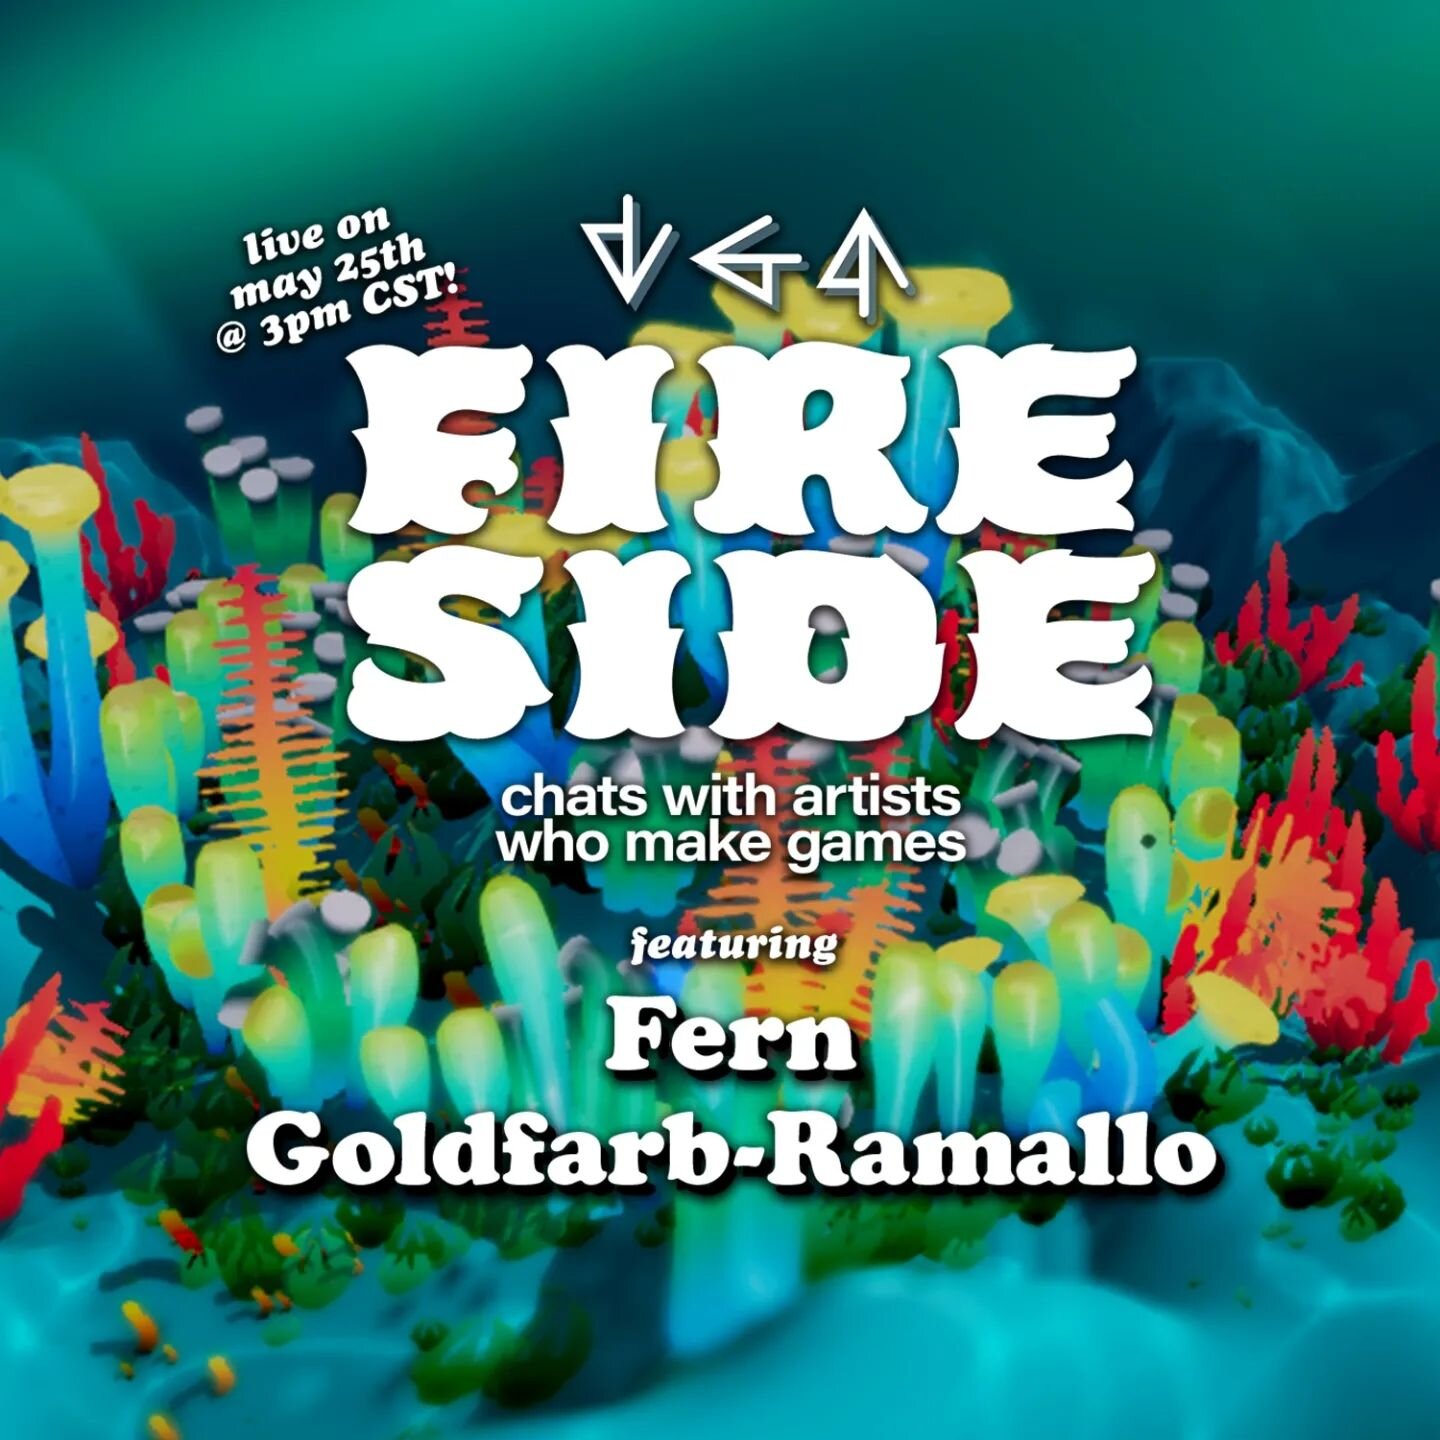 VGA Gallery welcomes Fern Goldfarb-Ramallo for our next episode of VGA FIRESIDE! Goldfarb-Ramallo is a creative coder, designer and visual artist based in Brooklyn and Berlin.

Streaming live via Twitch and YouTube on Wednesday, May 25th, 2022 at 3 P